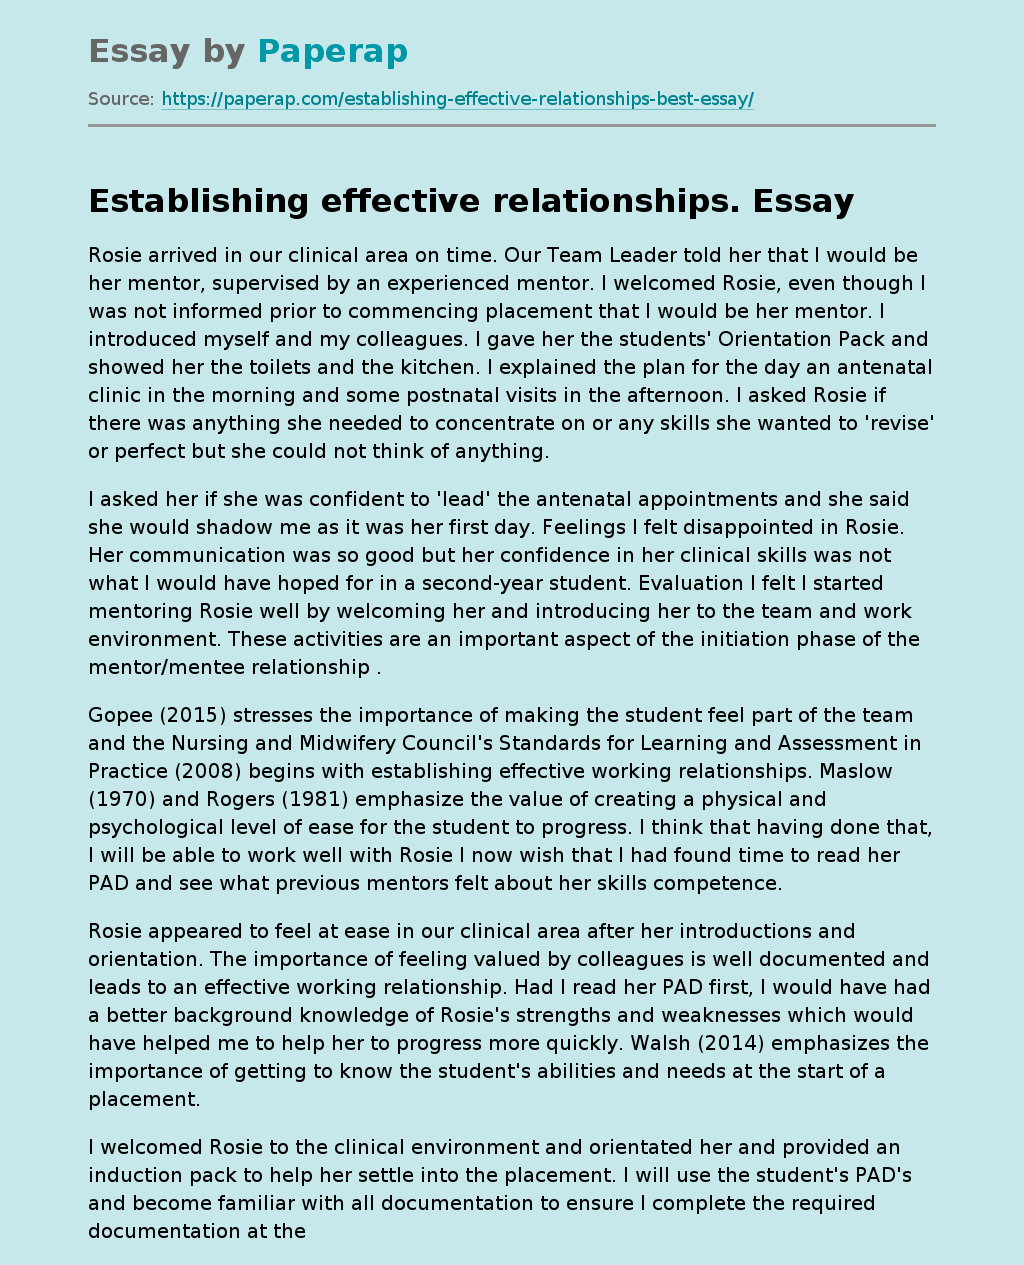 good essay titles about relationships